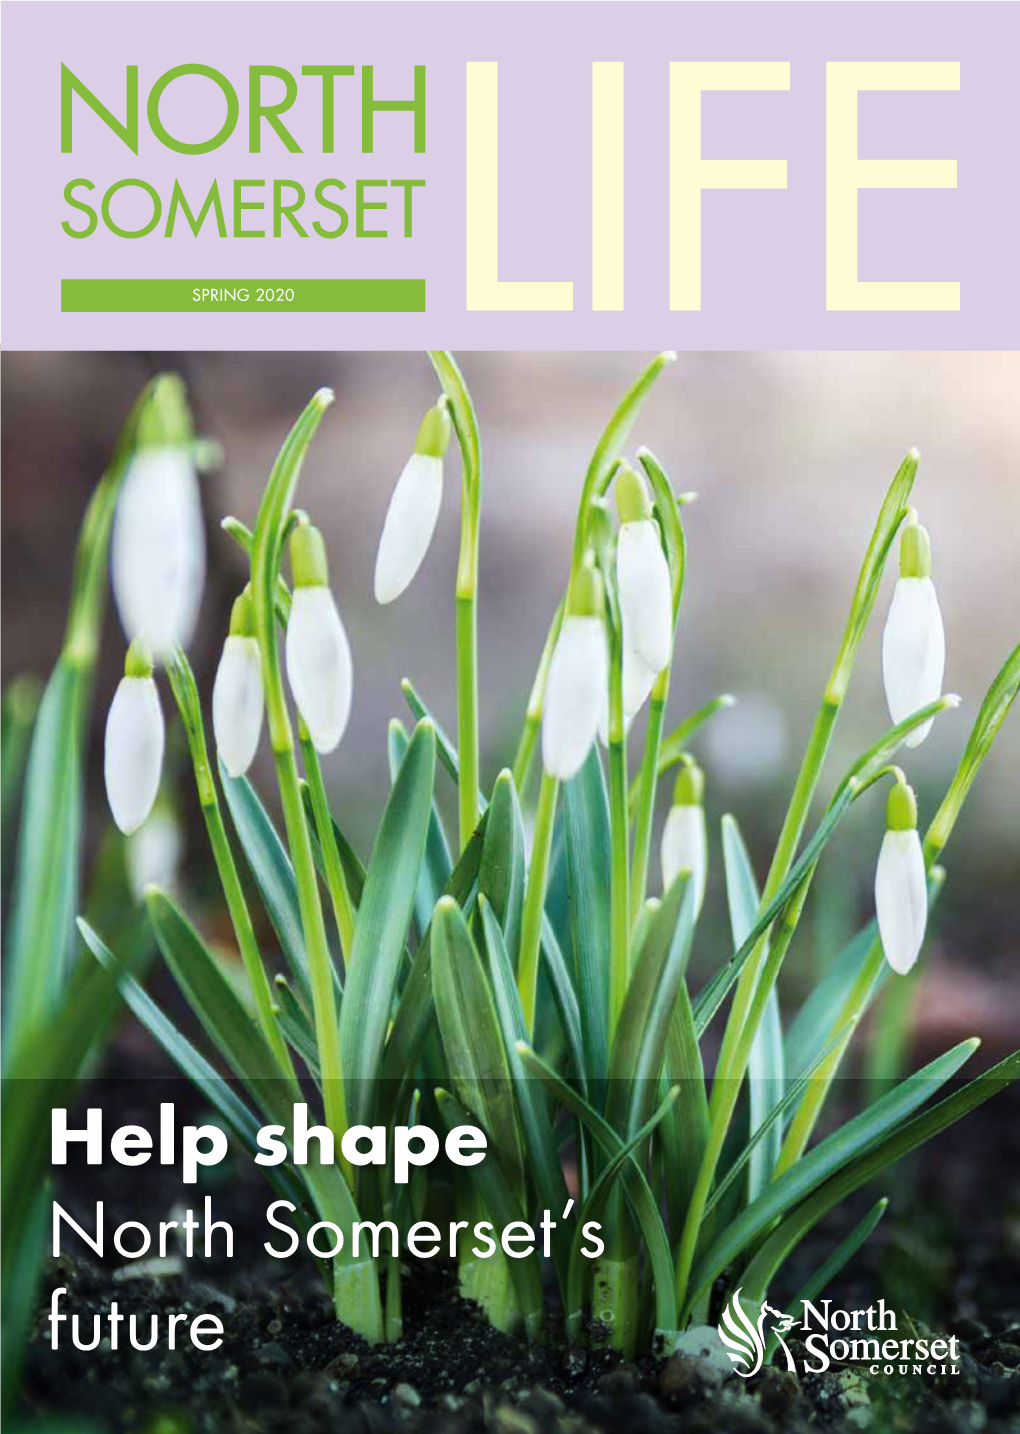 North Somerset Life • Spring 2020 for the Latest Updates on North Somerset’S News Visit